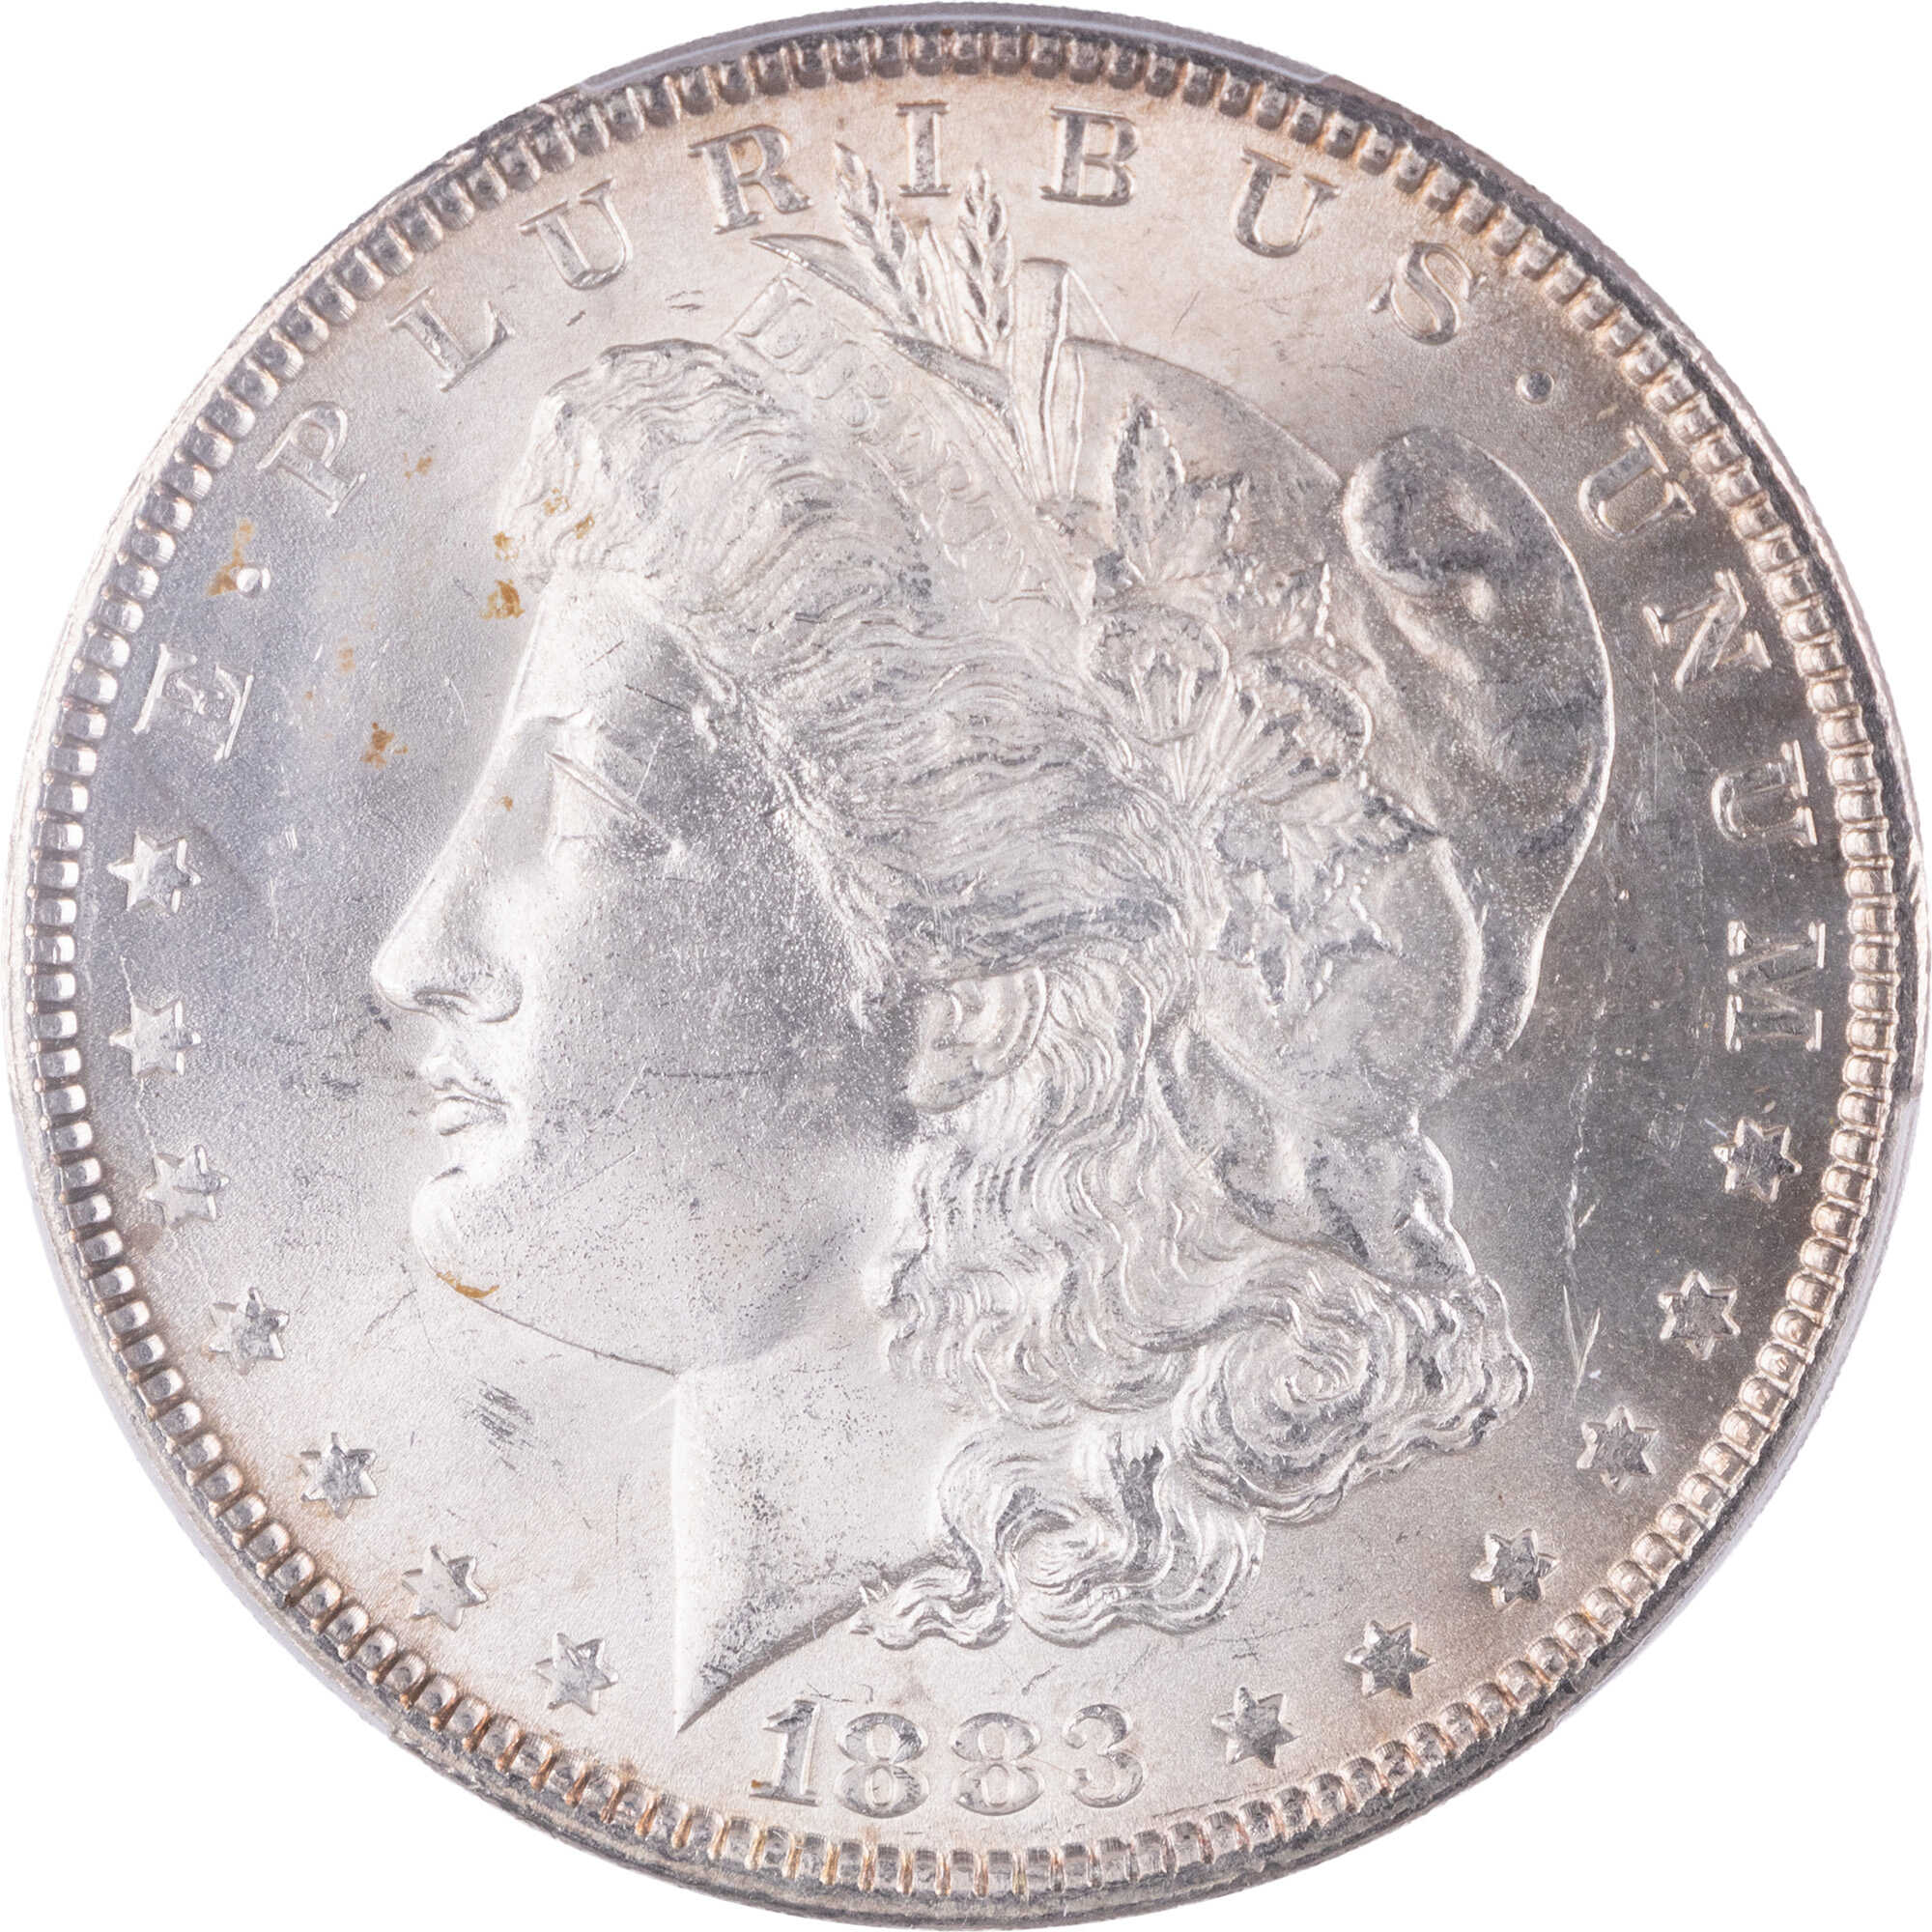 1883 Morgan Dollar MS 64 PCGS Silver $1 Uncirculated Coin SKU:I12860 - Morgan coin - Morgan silver dollar - Morgan silver dollar for sale - Profile Coins &amp; Collectibles